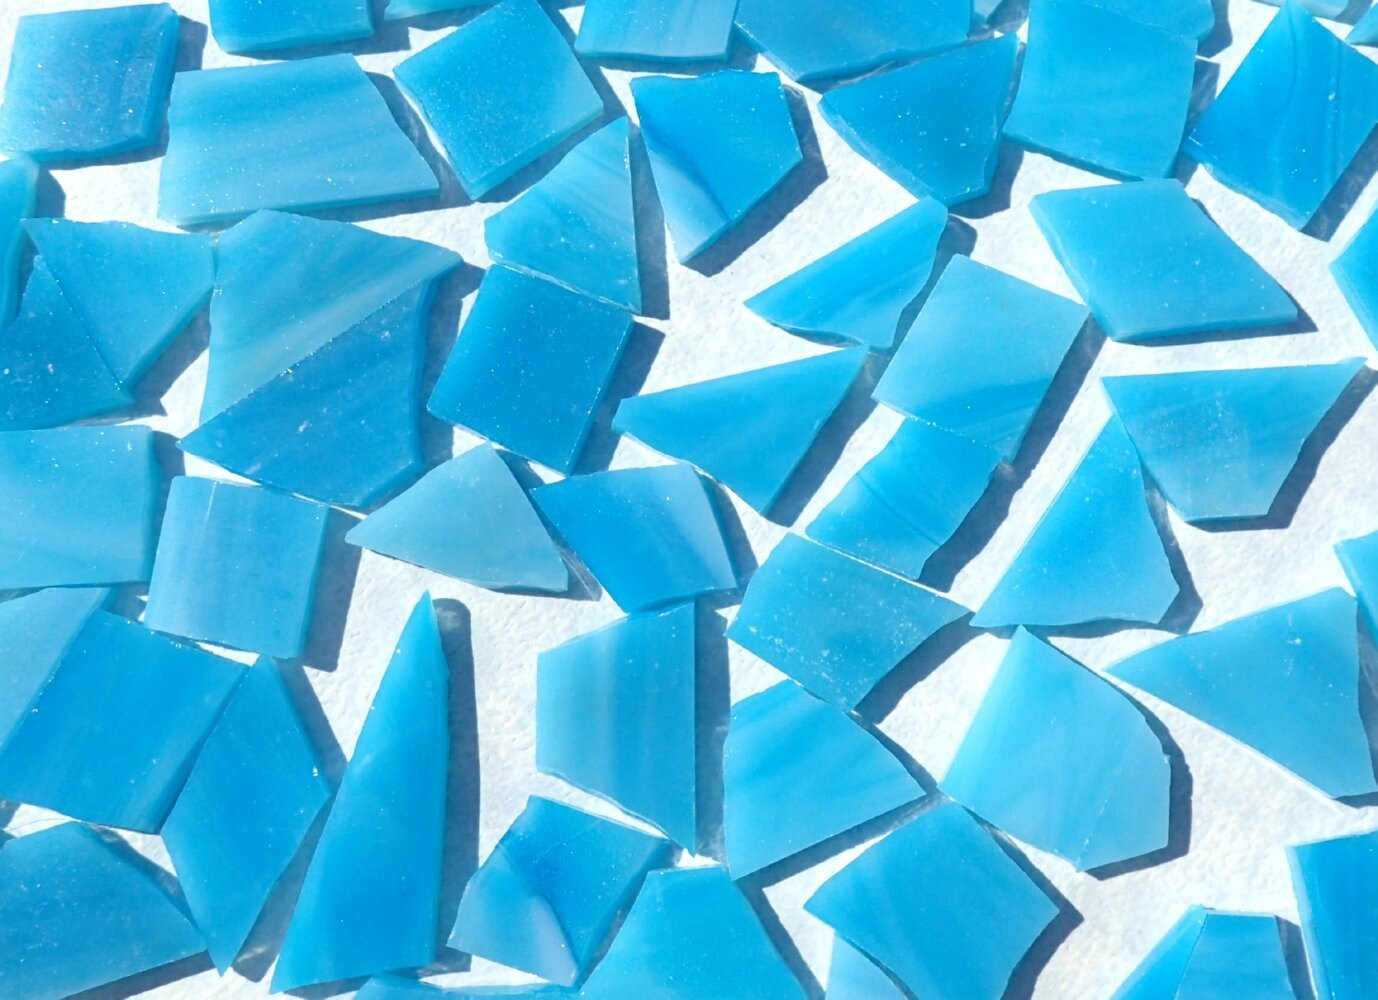 Stained Glass Mosaic Tiles in Caribbean Blue - 1/2 Pound - Tropical Blue Glass Tiles